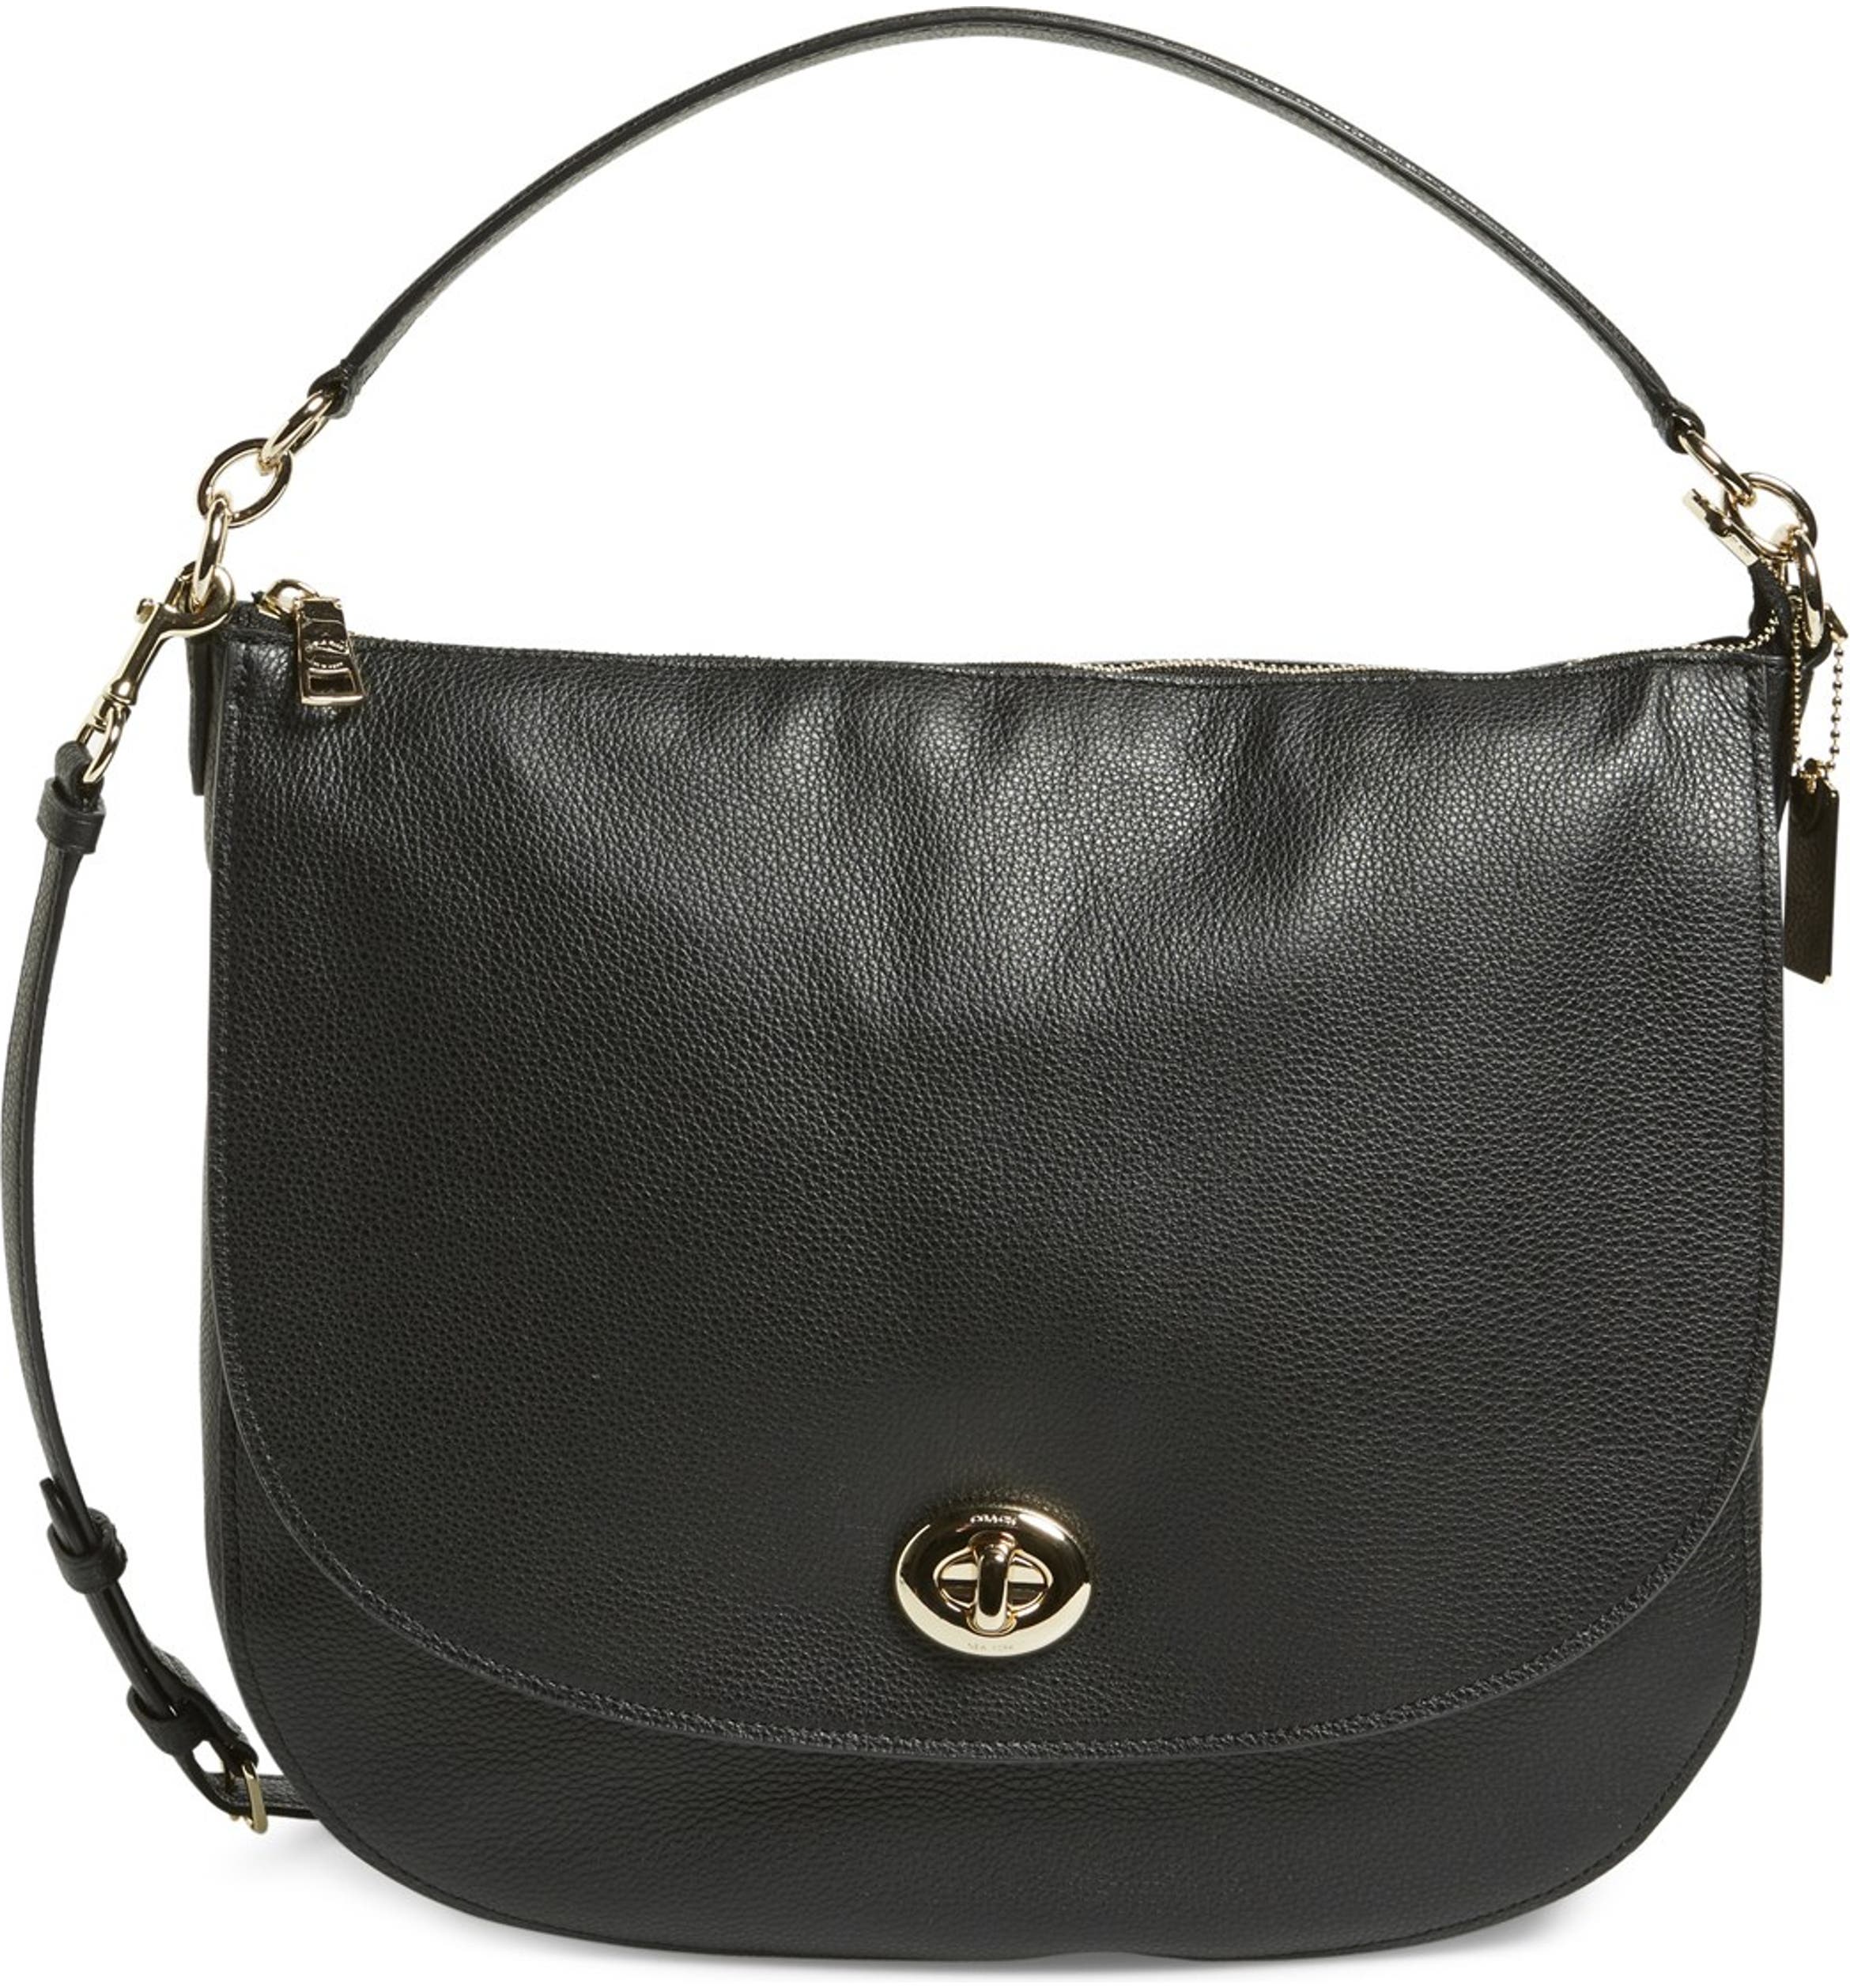 COACH 'Turnlock' Leather Hobo | Nordstrom